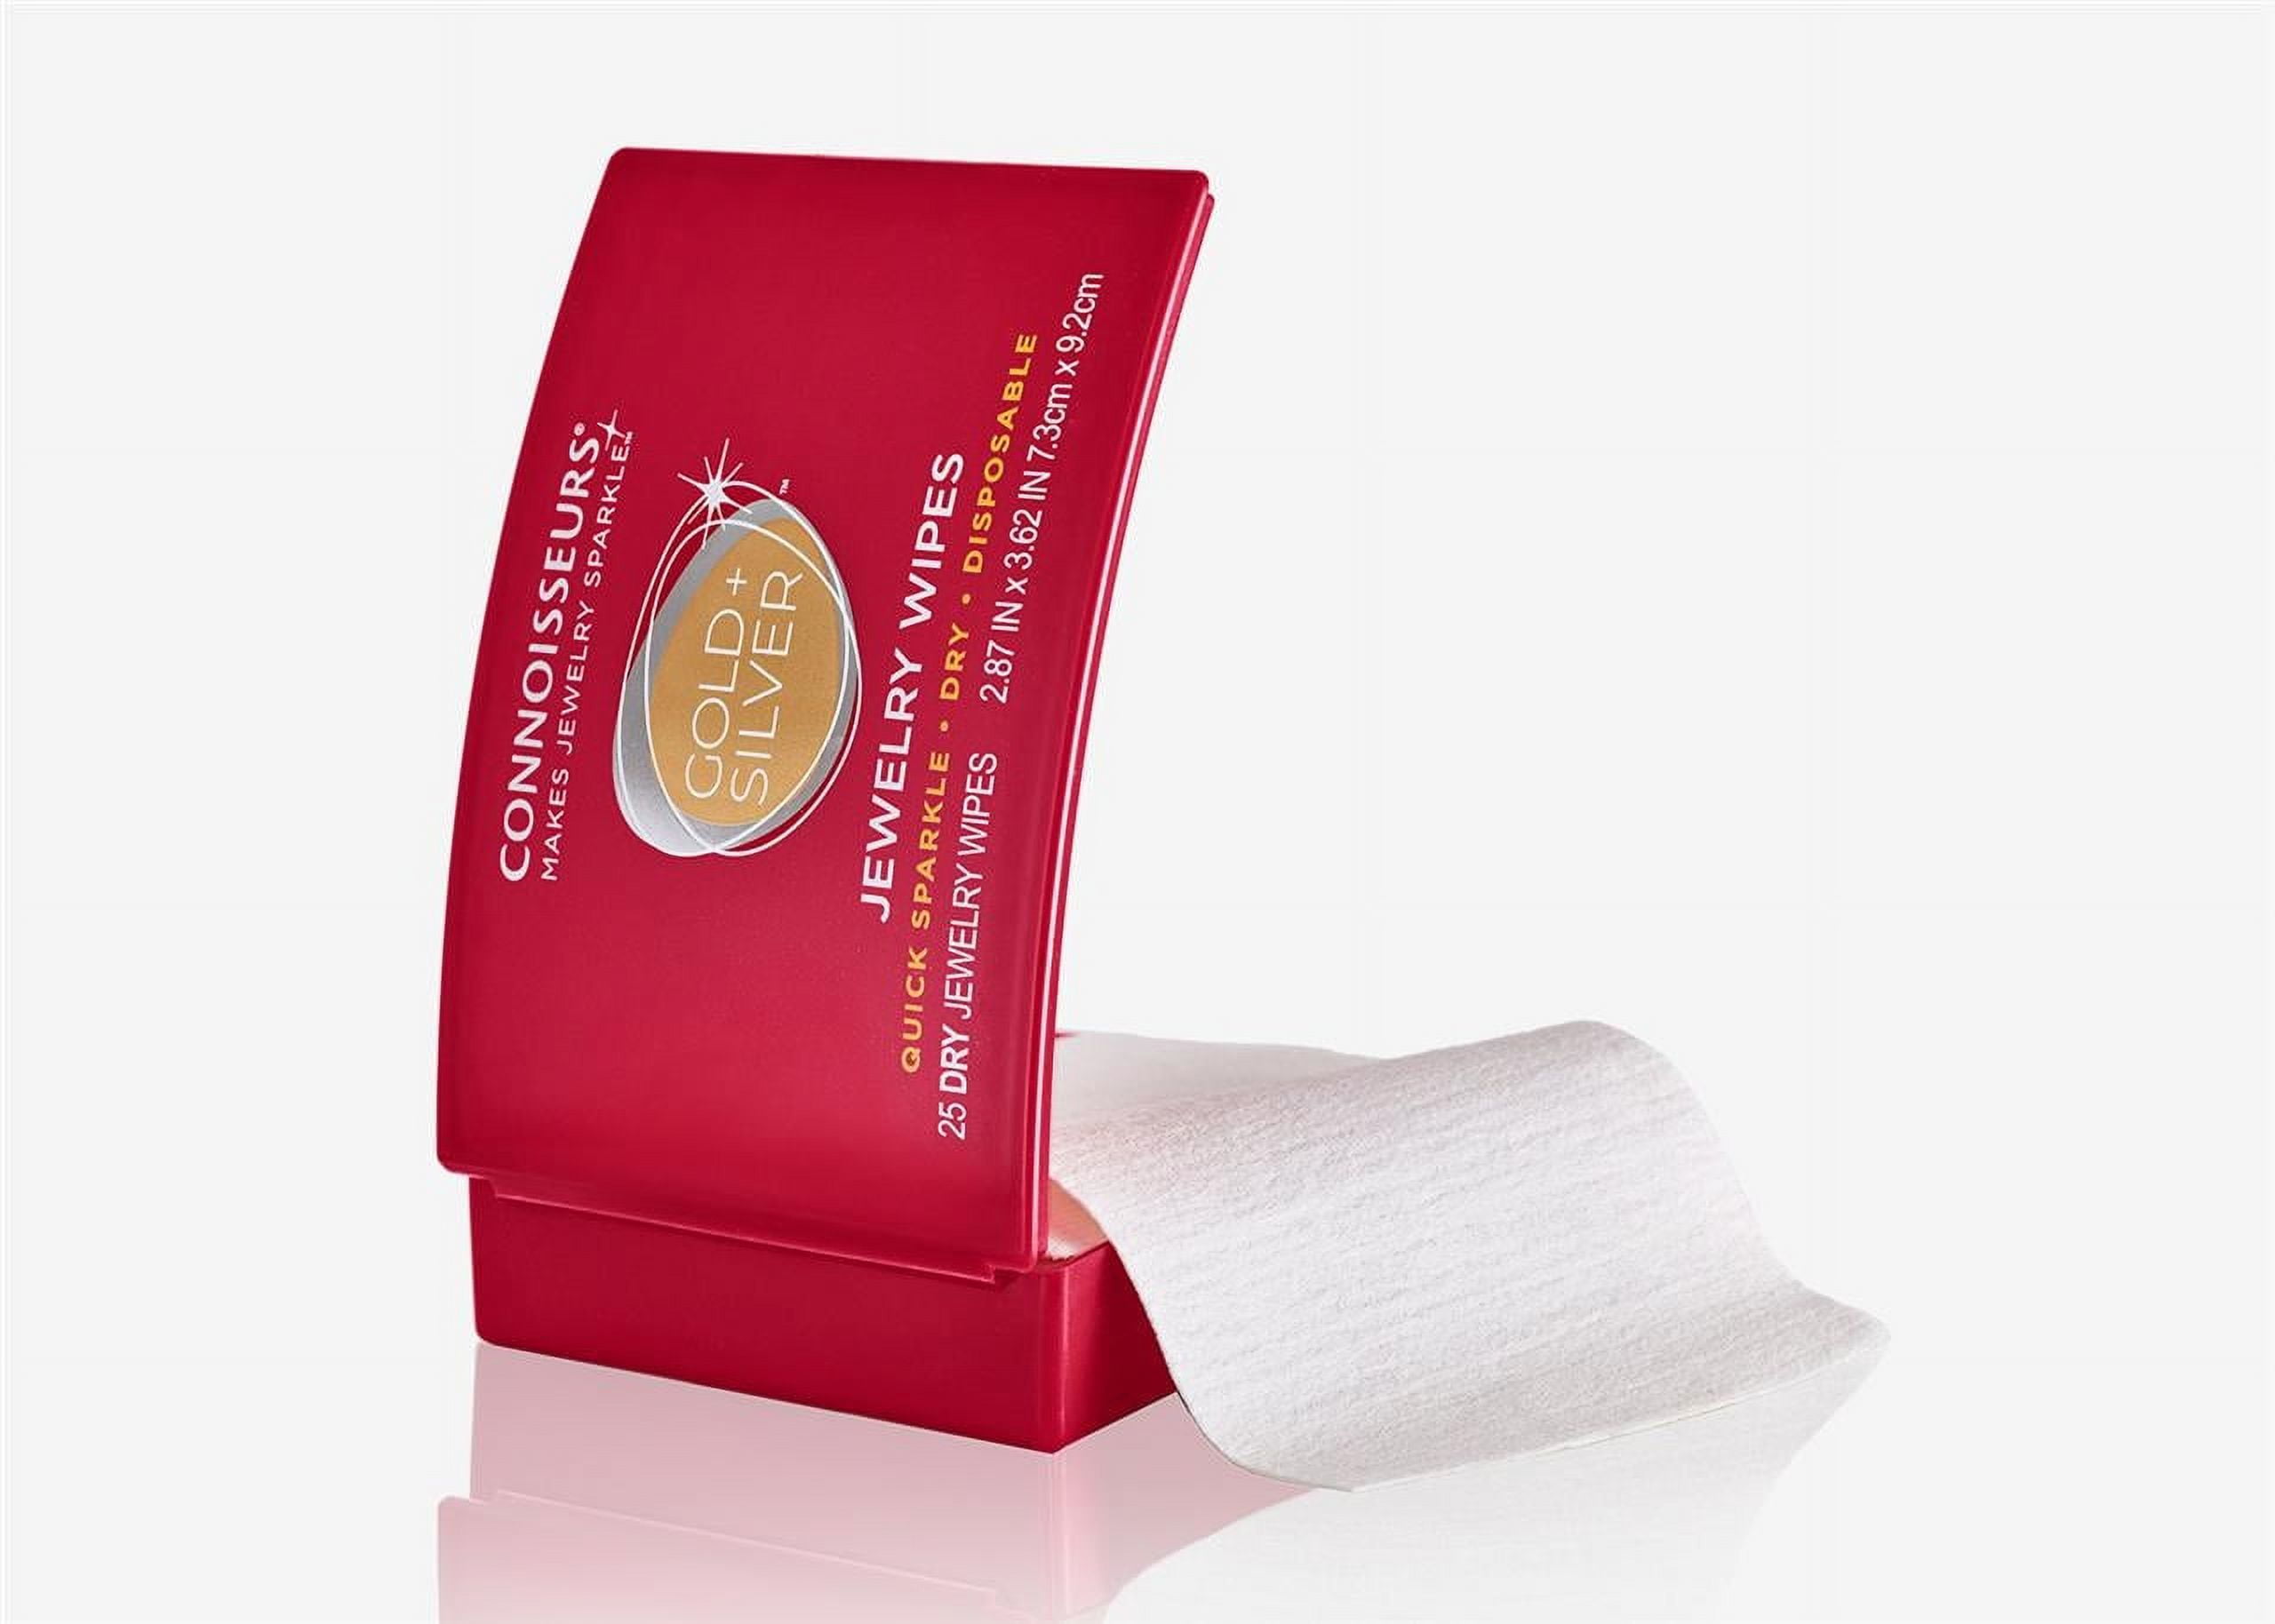 Connoisseurs Gold & Silver Jewelry Cleaning Wipes, Red Compact